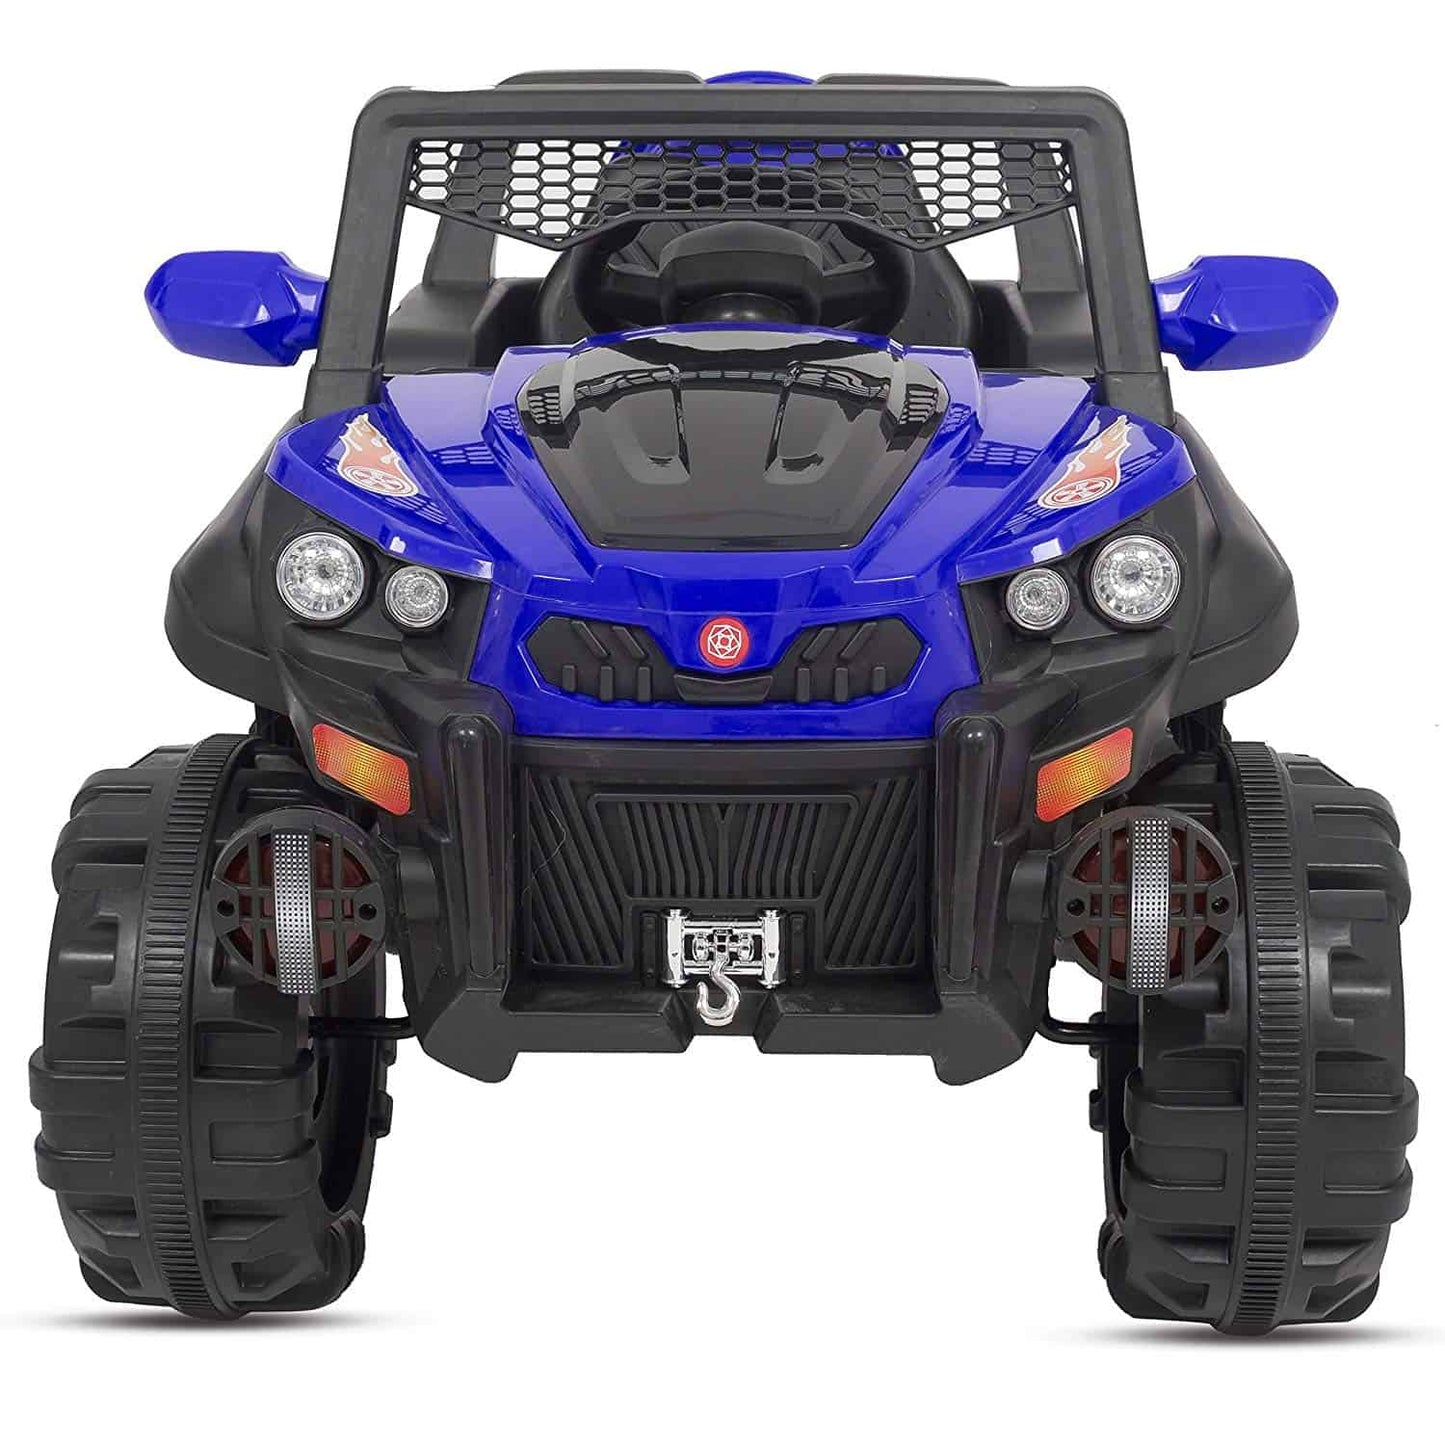 Warlock Baby Toy Car Rechargeable Battery Operated Ride on car for Kids/Baby with R/C Jeep Children Car Electric Motor Car Kids Cars,Baby Racing Car for Boys & Girls Age 2 to 6 Years